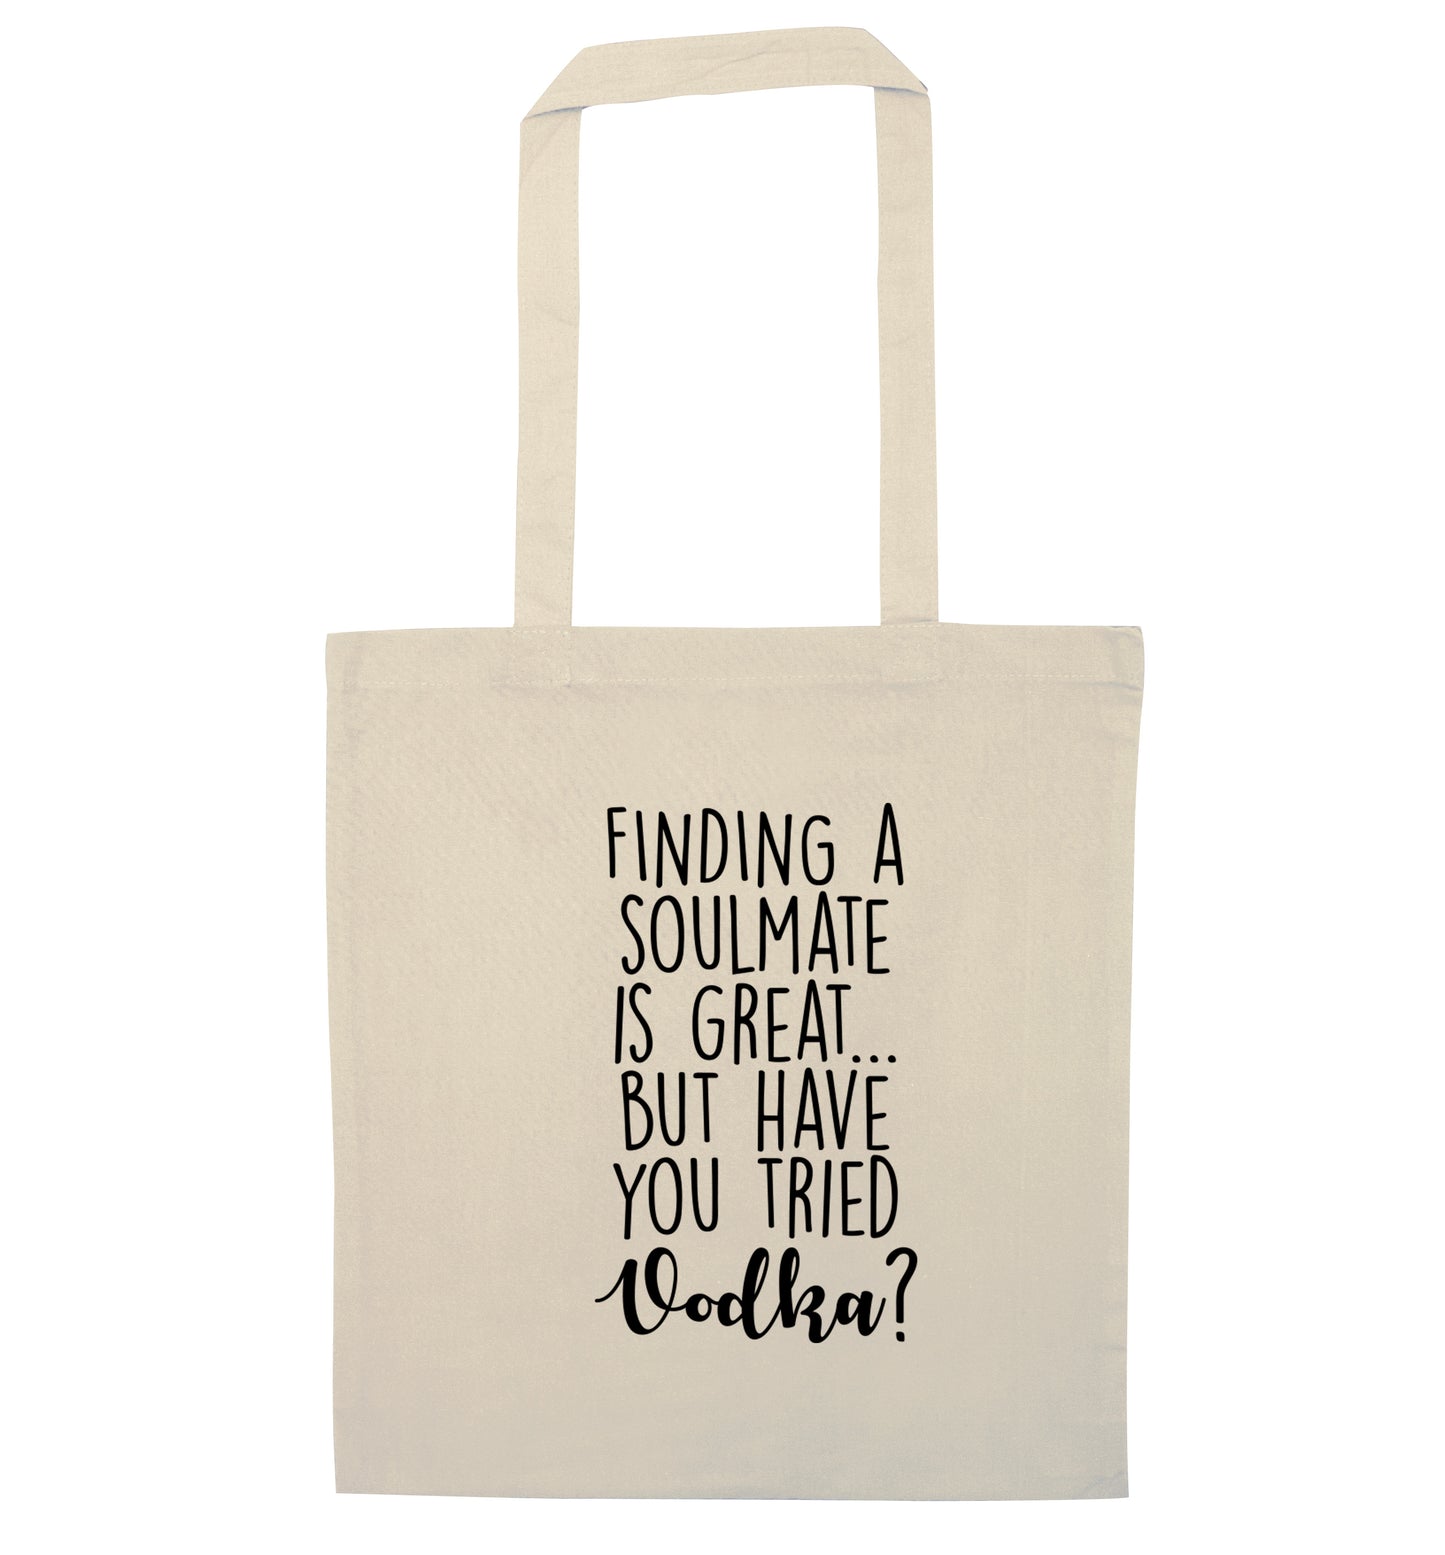 Finding a soulmate is great but have you tried vodka? natural tote bag